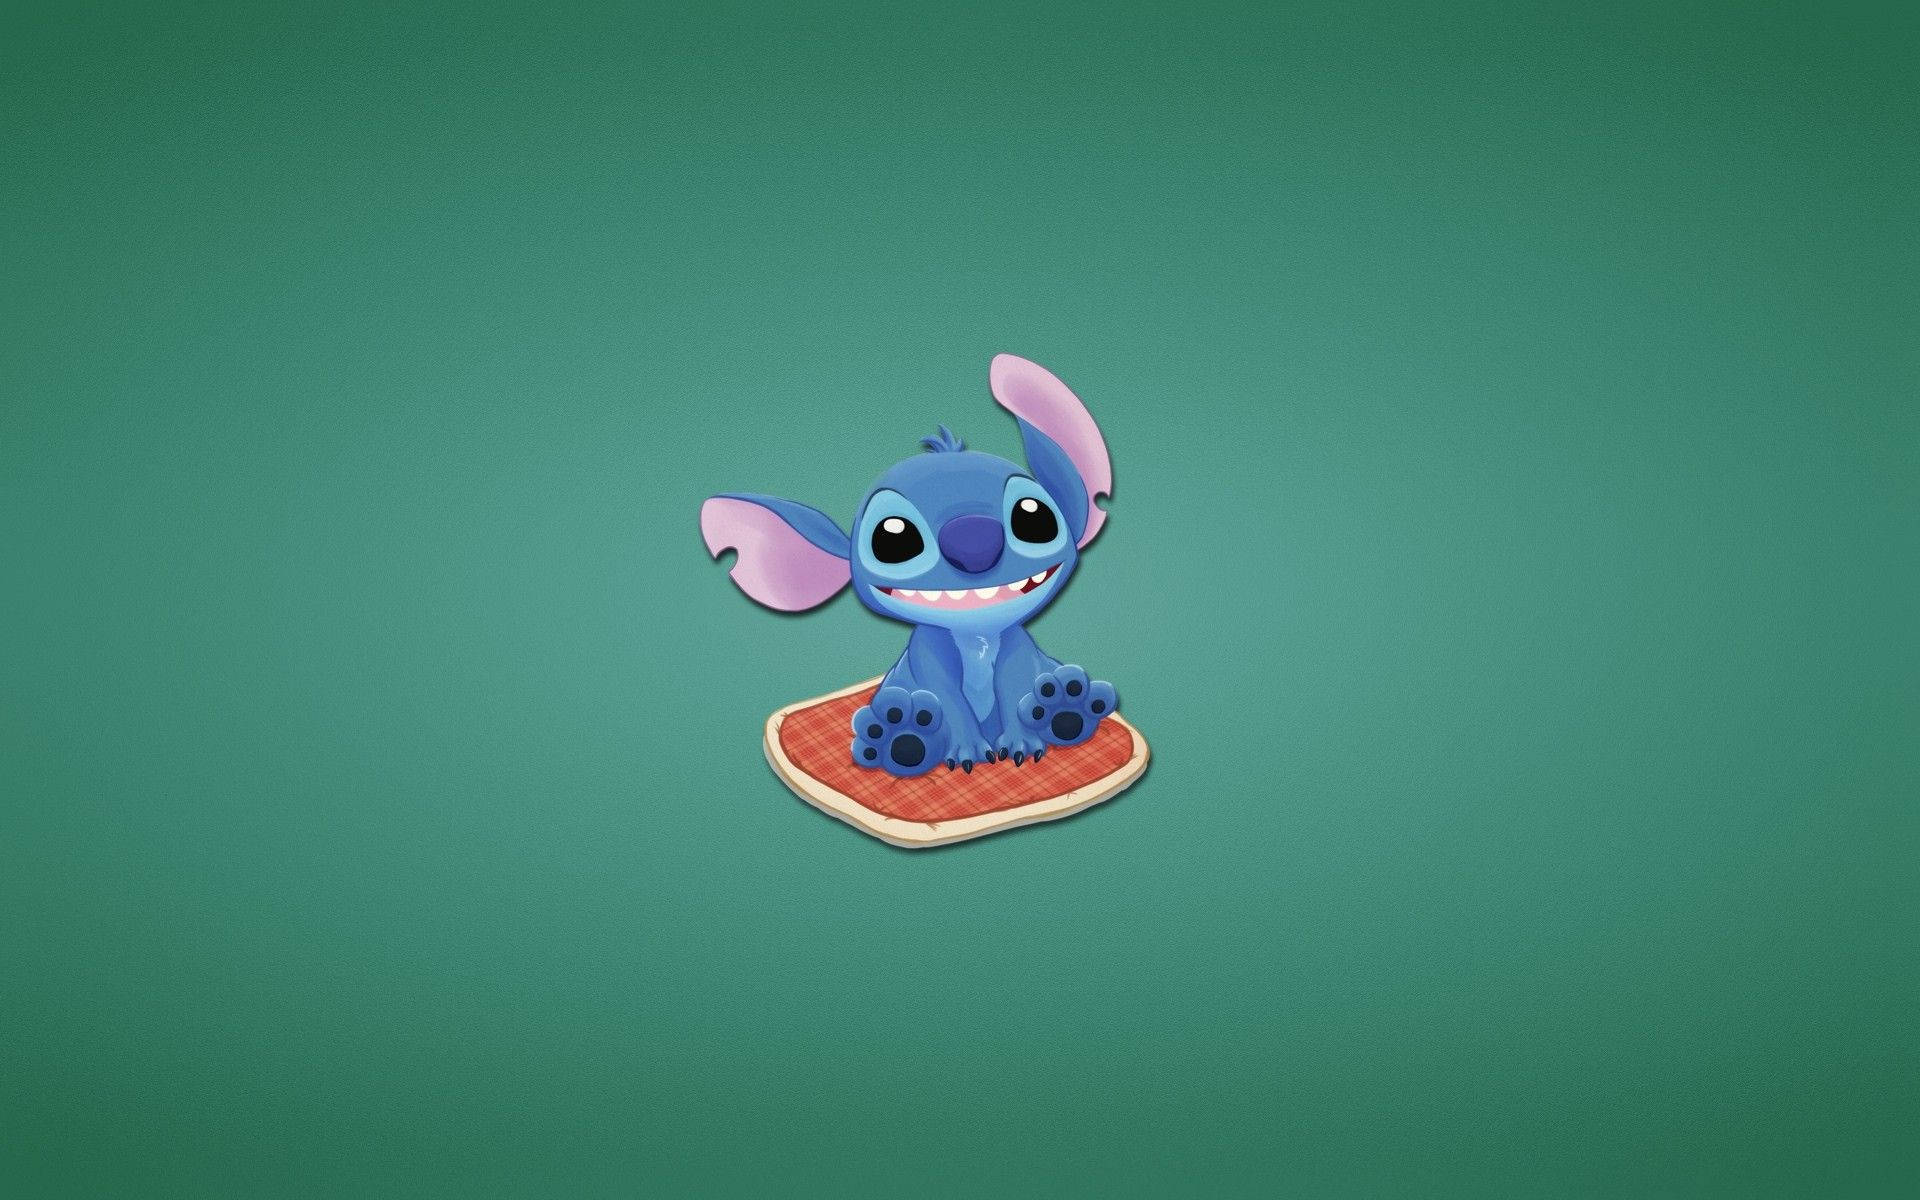 Stitch sitting on a red pillow wallpaper.